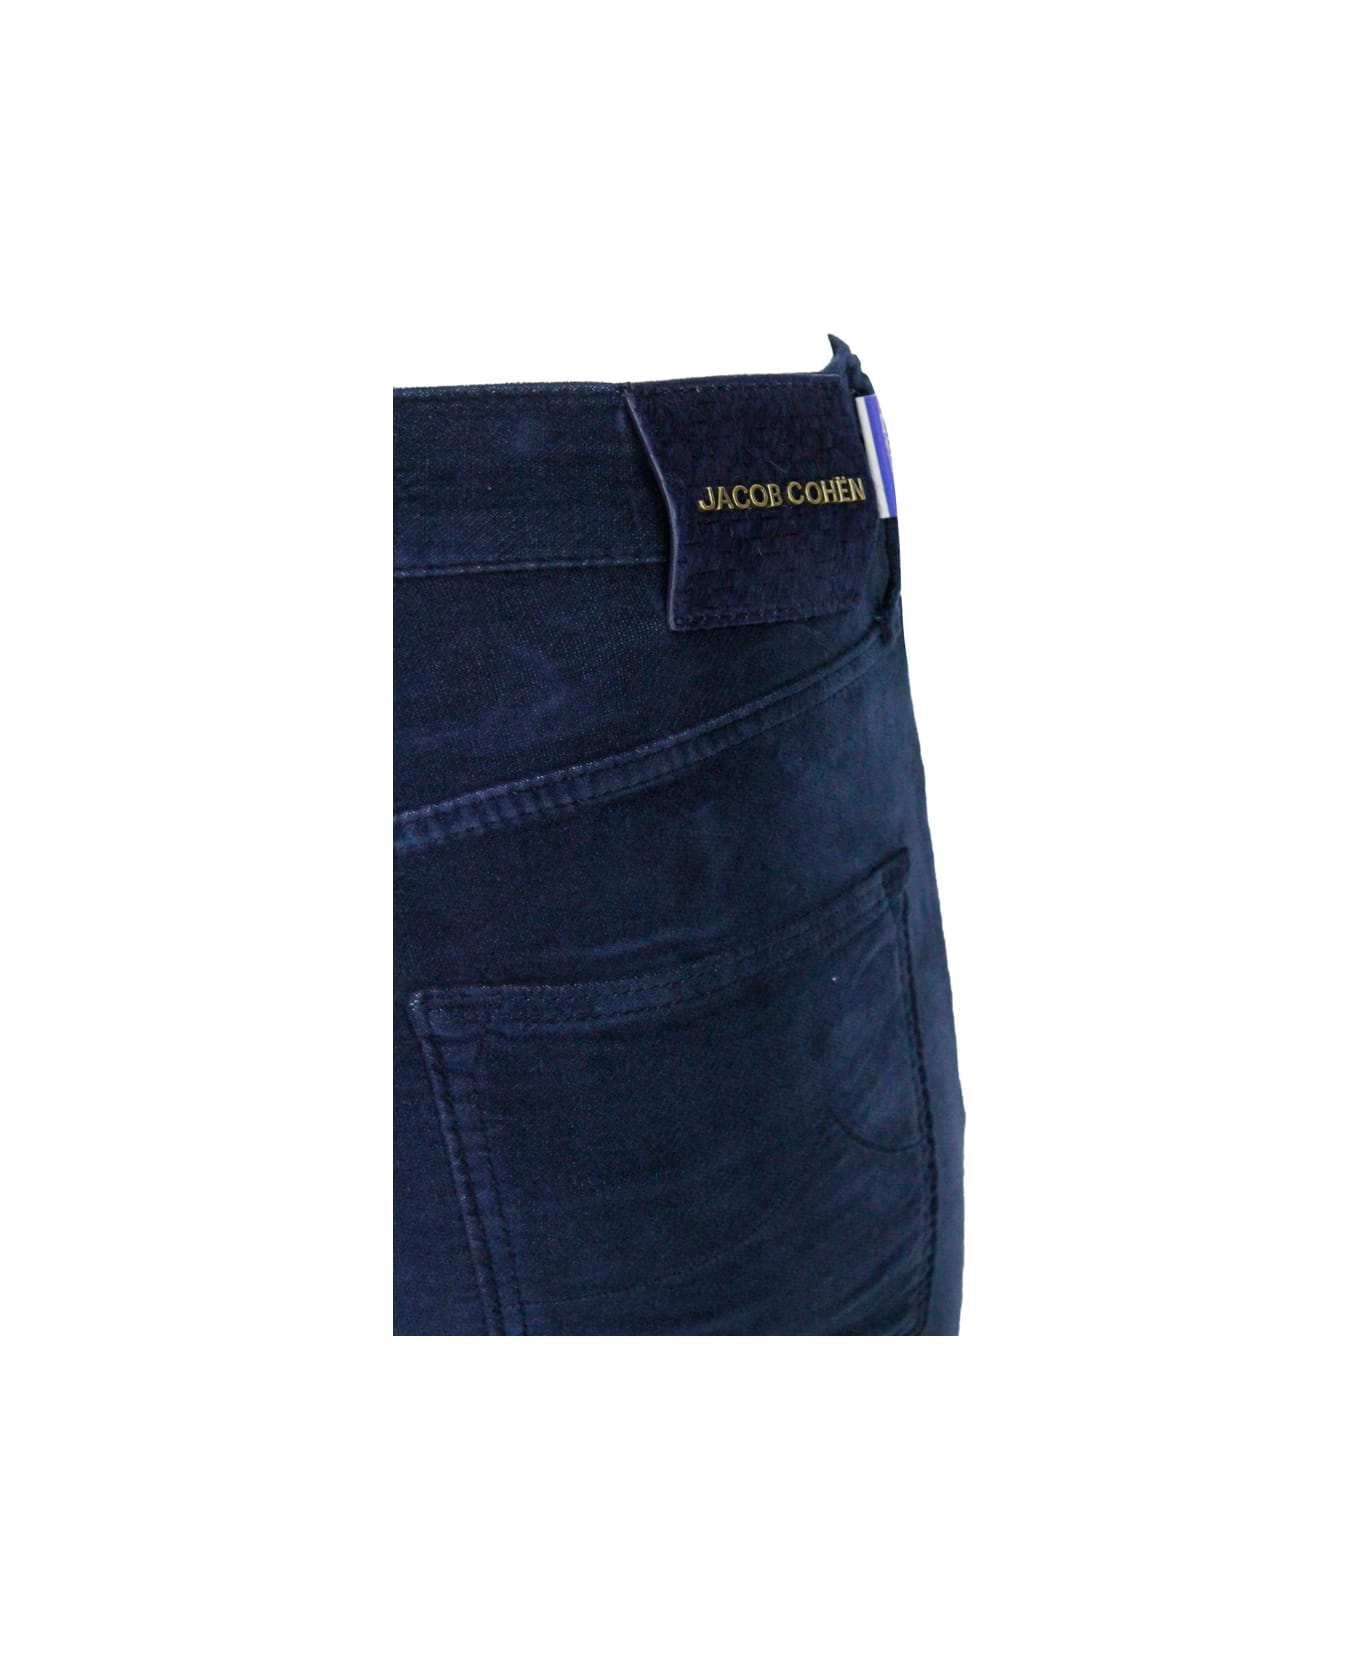 Jacob Cohen Kimberly Cigarette Cut Trousers In Soft Smooth Stretch Velvet With 5 Pockets With Zip And Button Closure. Skinny Regular Waist. Velvet Tag With Logo - Blu